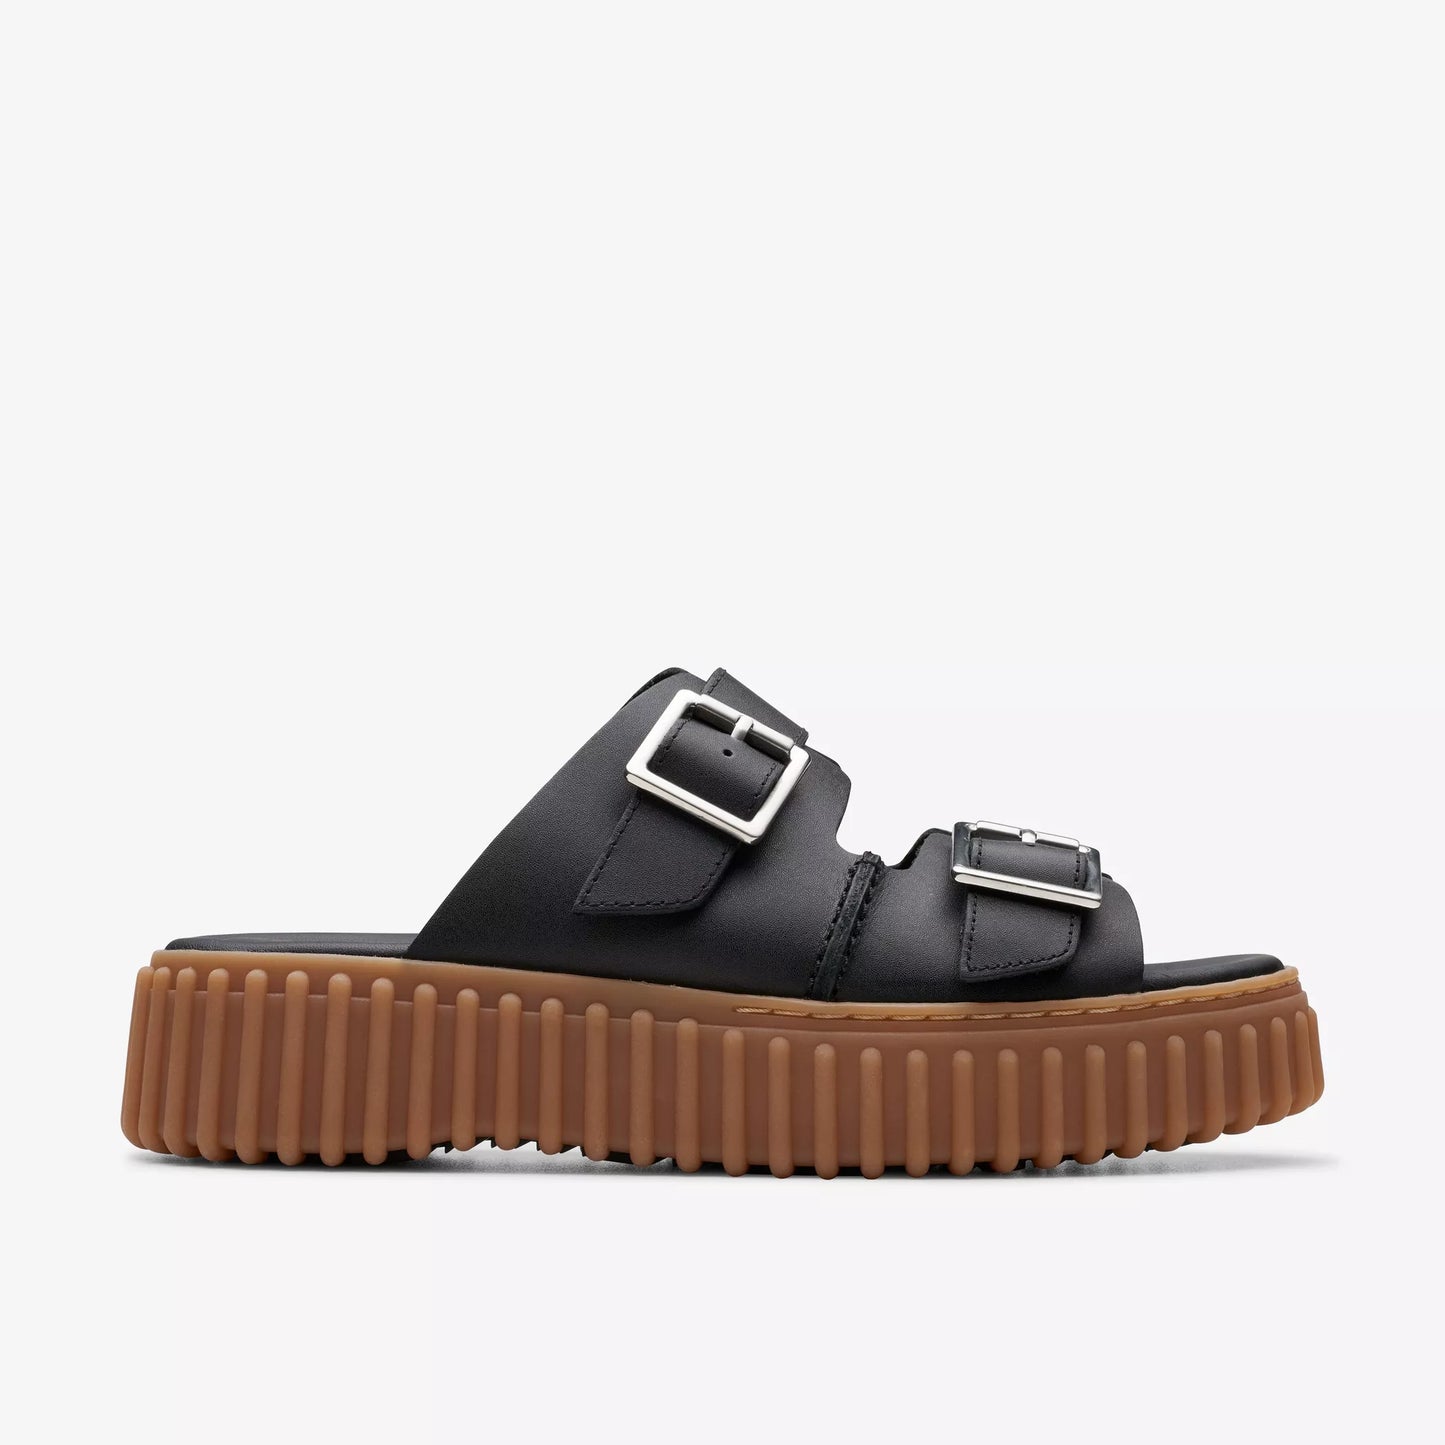 Side view of the black leather Torhill Slide Sandal from Clarks